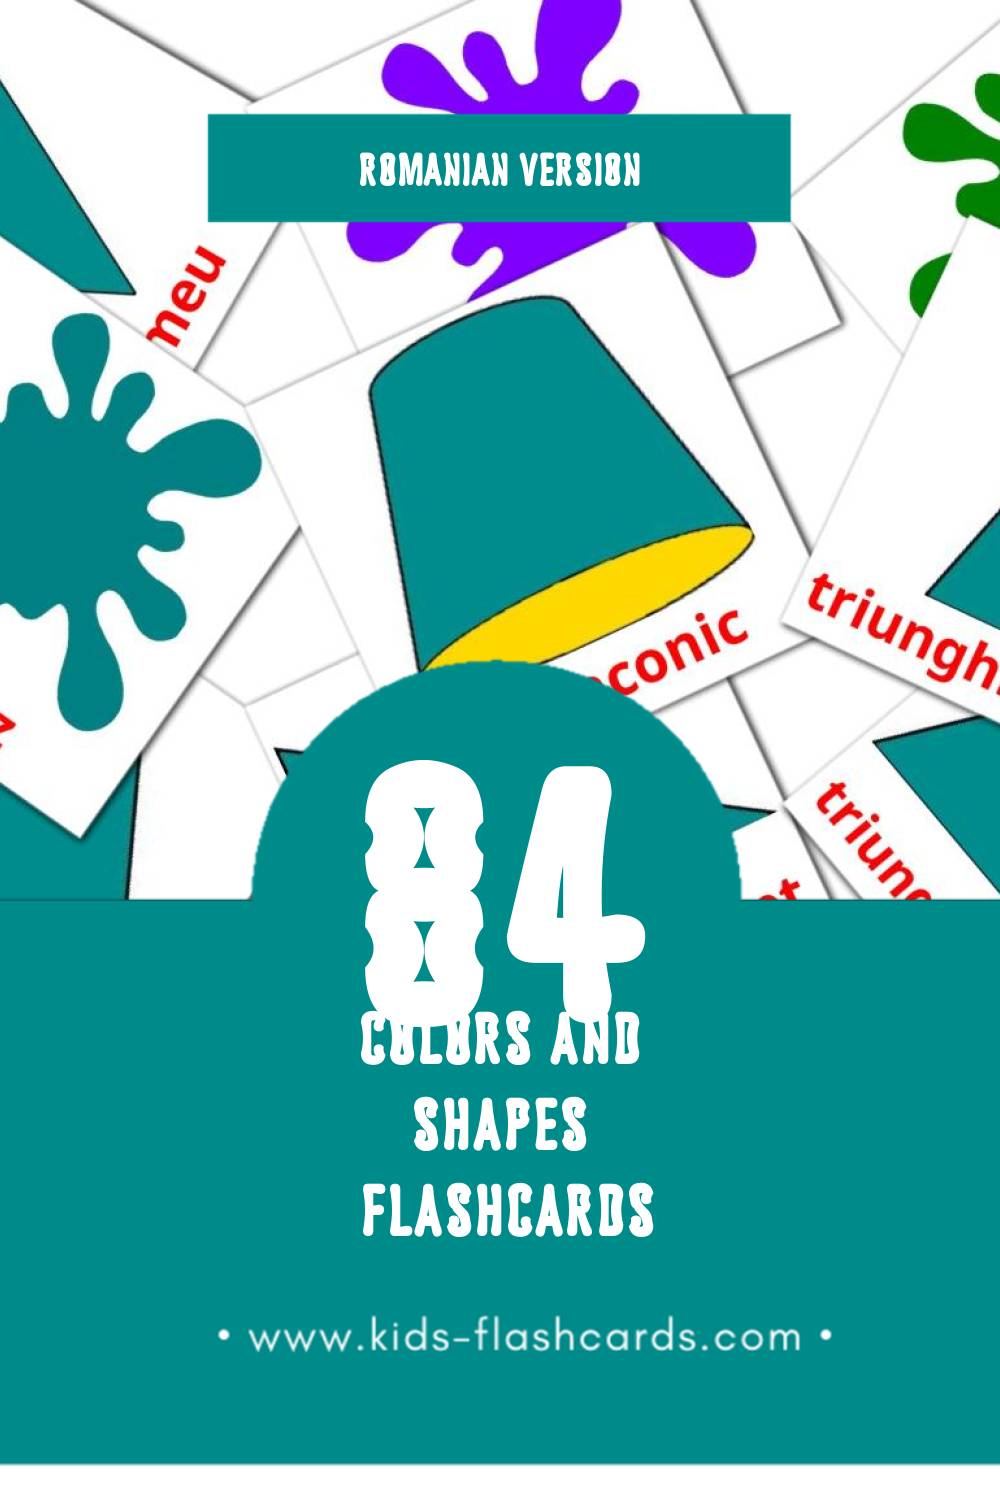 Visual culori și forme Flashcards for Toddlers (84 cards in Romanian)